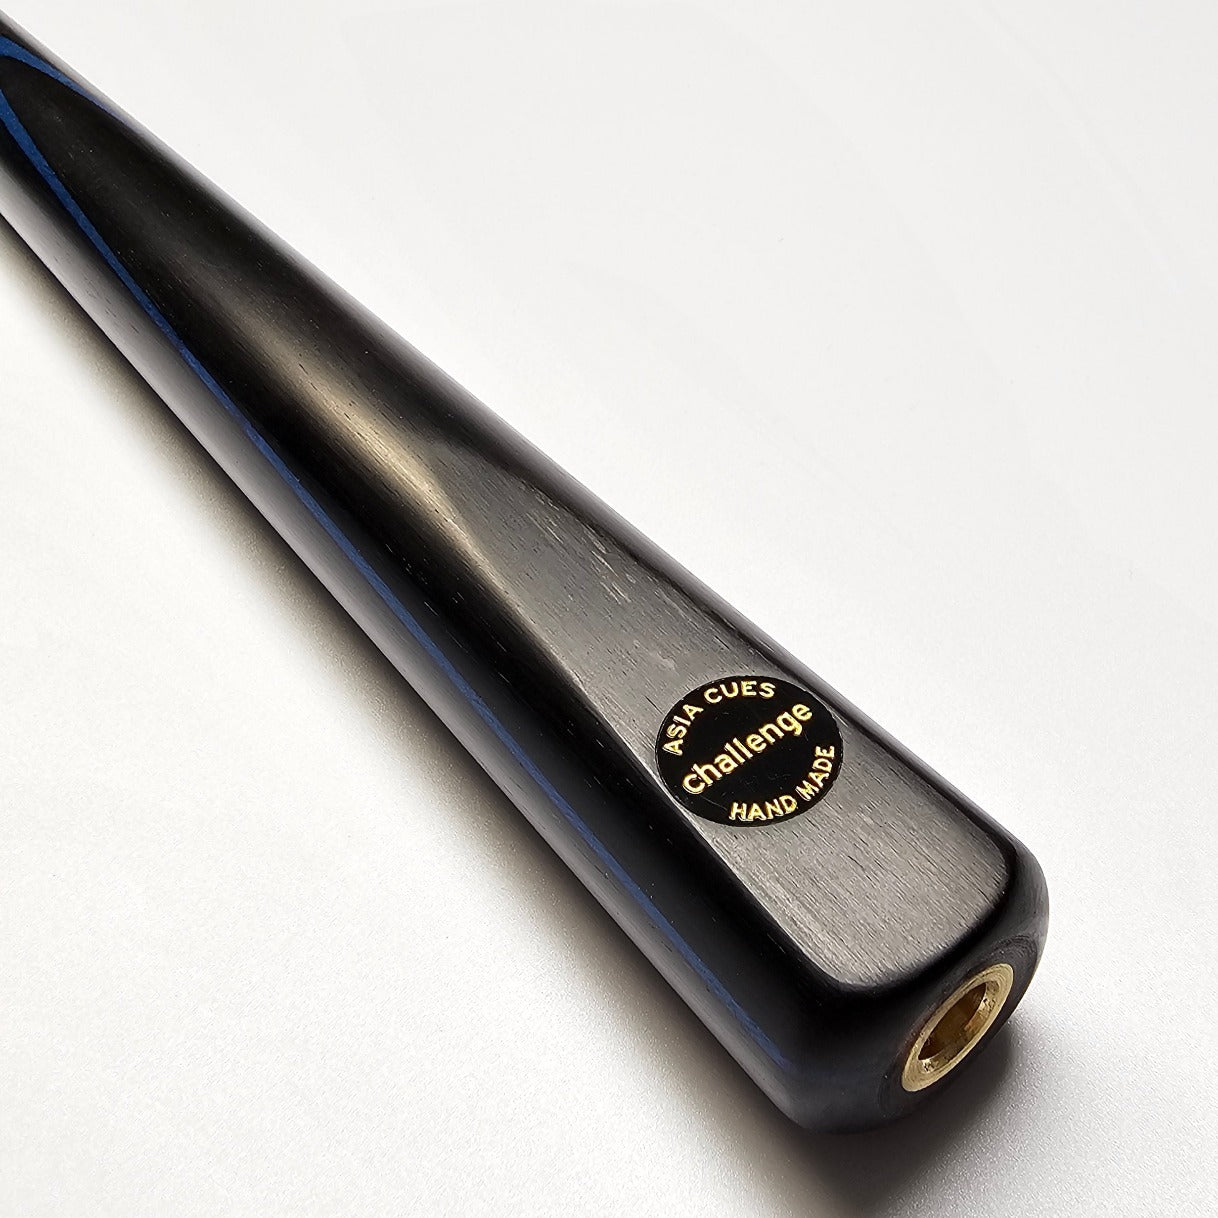 Asia Cues Challenge Range One Piece Cue Ash Shaft Ebony Butt with Blue Veneer. Badge View